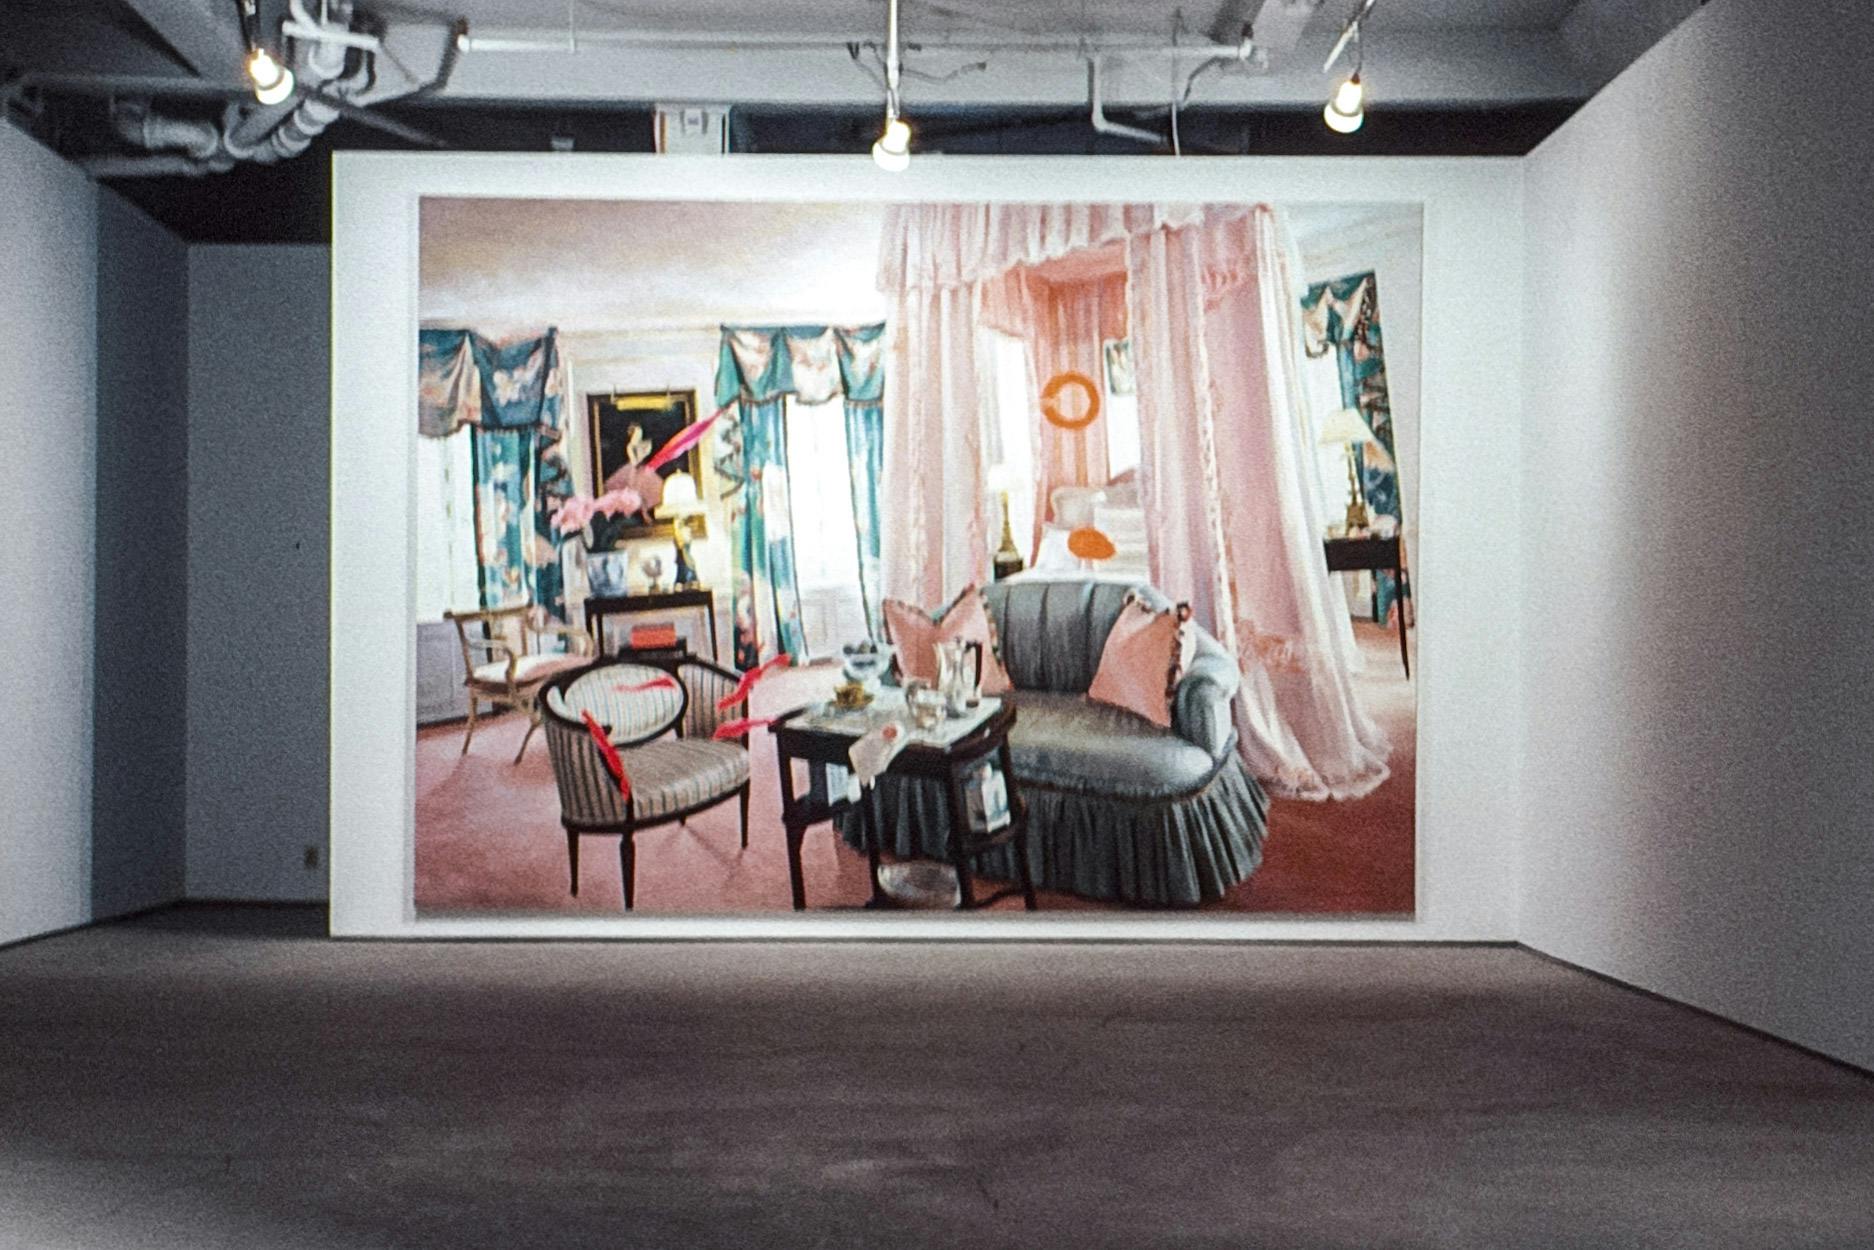 A painting in a gallery space nearly covers the wall it is mounted on. The painting shows a bright pink and blue bedroom with lush furnishings and is painted at a slightly distorted angle.